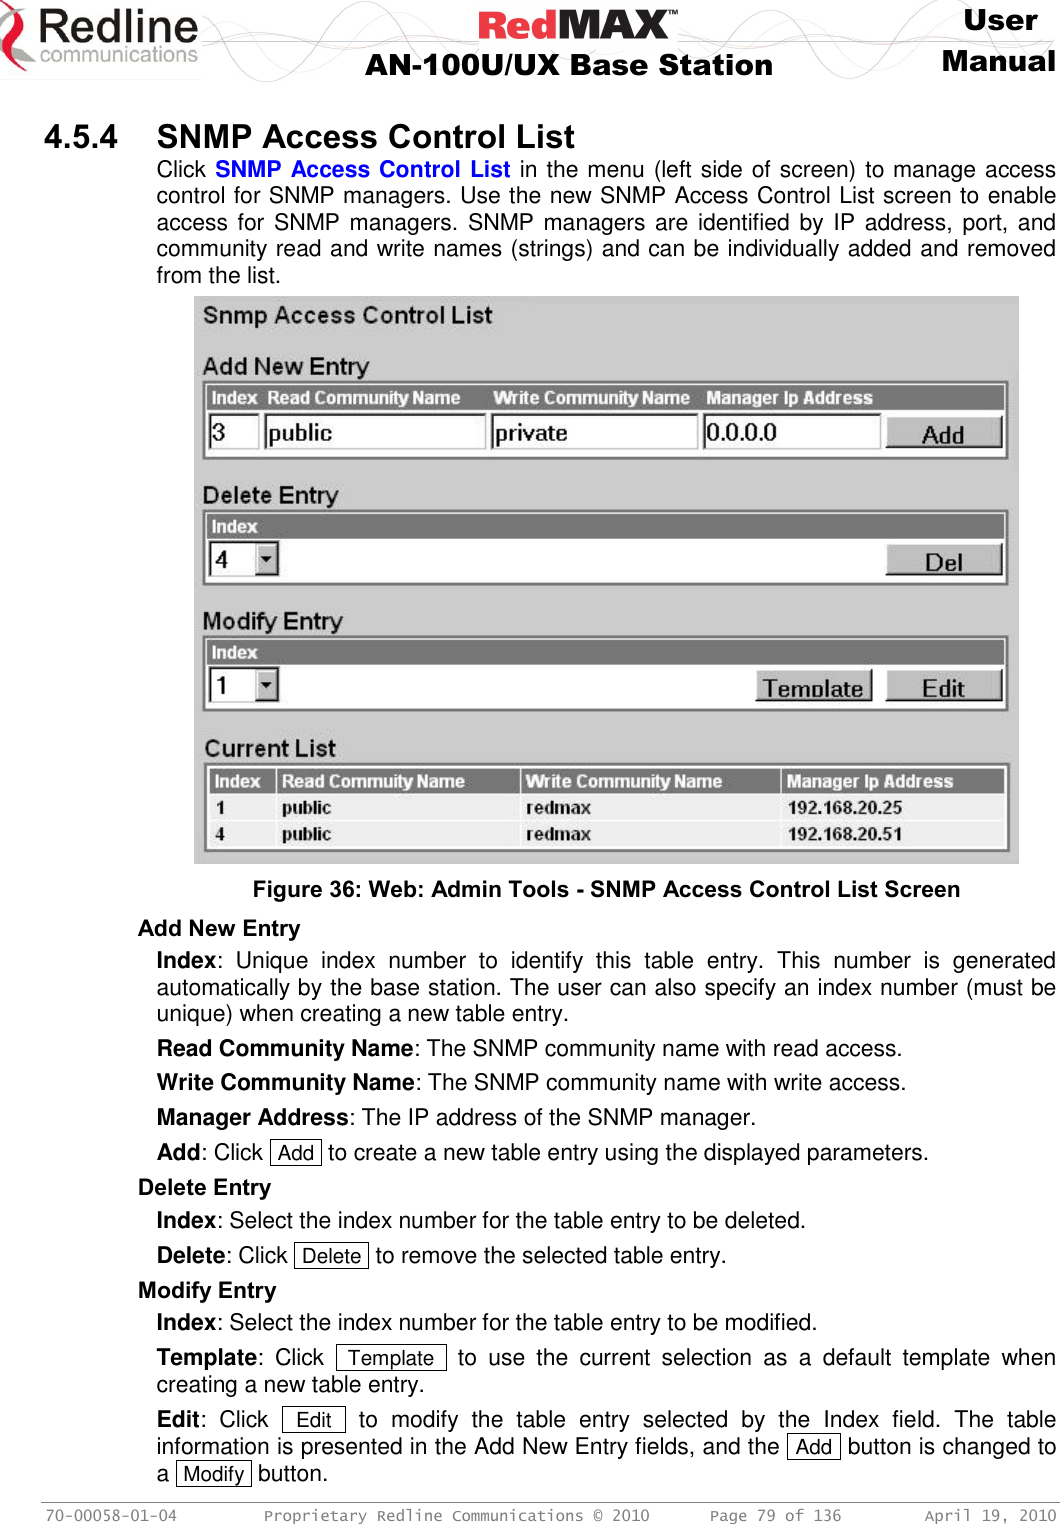     User  AN-100U/UX Base Station Manual   70-00058-01-04  Proprietary Redline Communications © 2010   Page 79 of 136  April 19, 2010  4.5.4 SNMP Access Control List Click SNMP Access Control List in the menu (left side of screen) to manage access control for SNMP managers. Use the new SNMP Access Control List screen to enable access for SNMP managers. SNMP managers are identified by IP address, port, and community read and write names (strings) and can be individually added and removed from the list.  Figure 36: Web: Admin Tools - SNMP Access Control List Screen Add New Entry Index:  Unique  index  number  to  identify  this  table  entry.  This  number  is  generated automatically by the base station. The user can also specify an index number (must be unique) when creating a new table entry. Read Community Name: The SNMP community name with read access. Write Community Name: The SNMP community name with write access. Manager Address: The IP address of the SNMP manager. Add: Click  Add  to create a new table entry using the displayed parameters. Delete Entry Index: Select the index number for the table entry to be deleted. Delete: Click  Delete  to remove the selected table entry. Modify Entry Index: Select the index number for the table entry to be modified. Template:  Click   Template   to  use  the  current  selection  as  a  default  template  when creating a new table entry. Edit:  Click   Edit   to  modify  the  table  entry  selected  by  the  Index  field.  The  table information is presented in the Add New Entry fields, and the  Add  button is changed to a  Modify  button. 